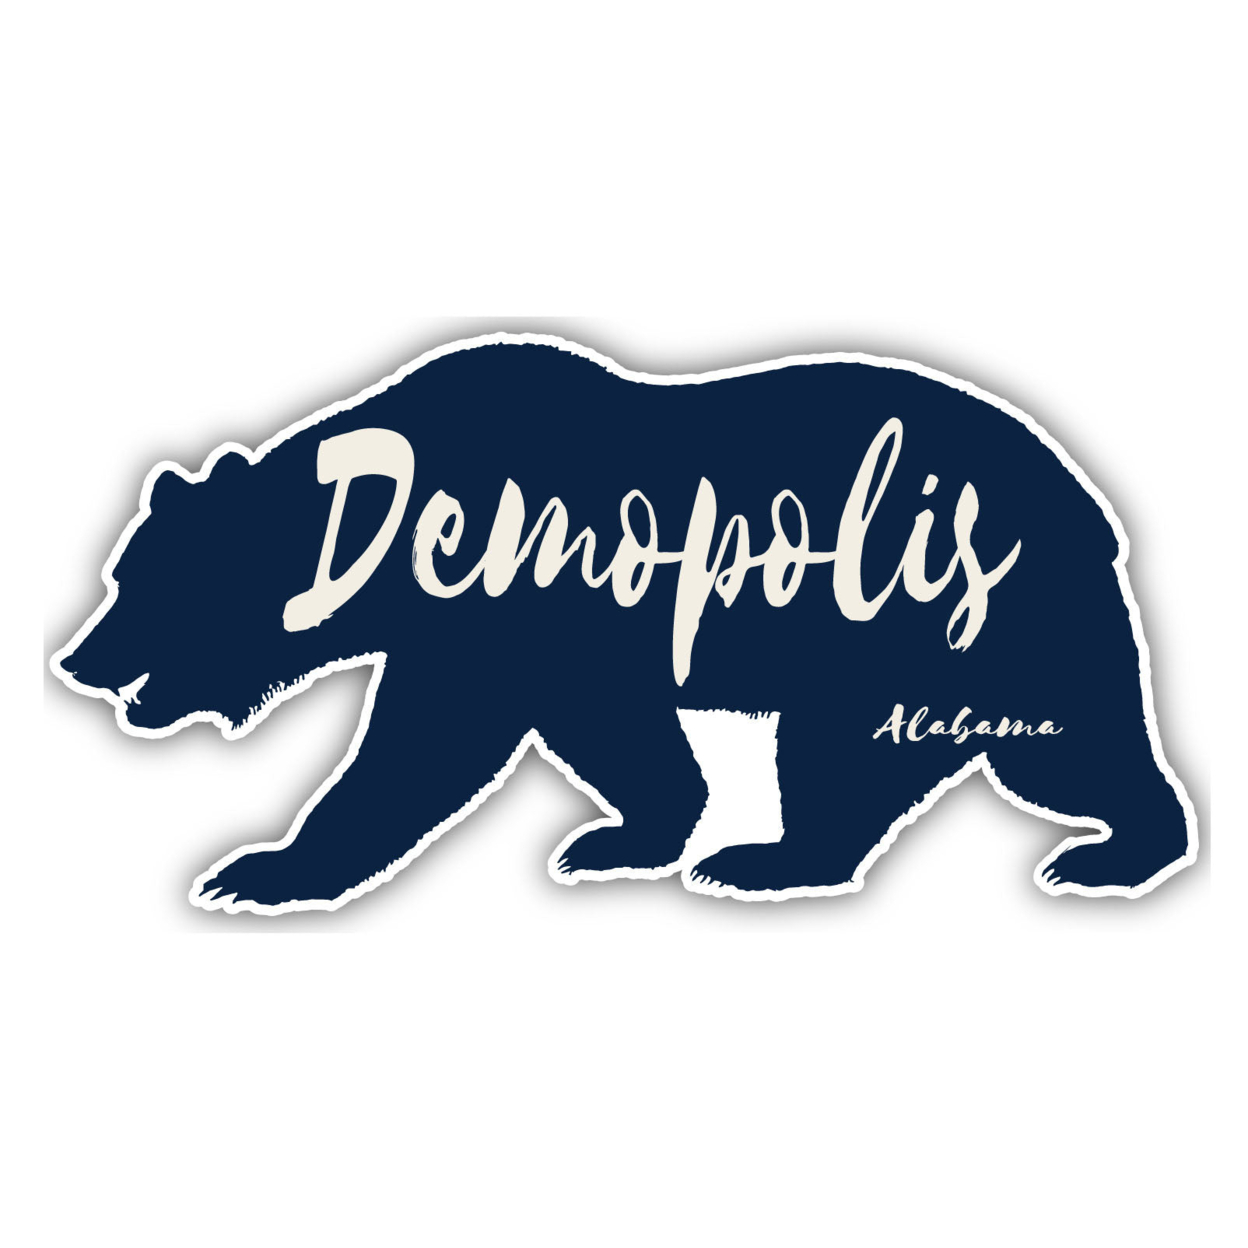 Demopolis Alabama Souvenir Decorative Stickers (Choose Theme And Size) - 4-Pack, 6-Inch, Great Outdoors